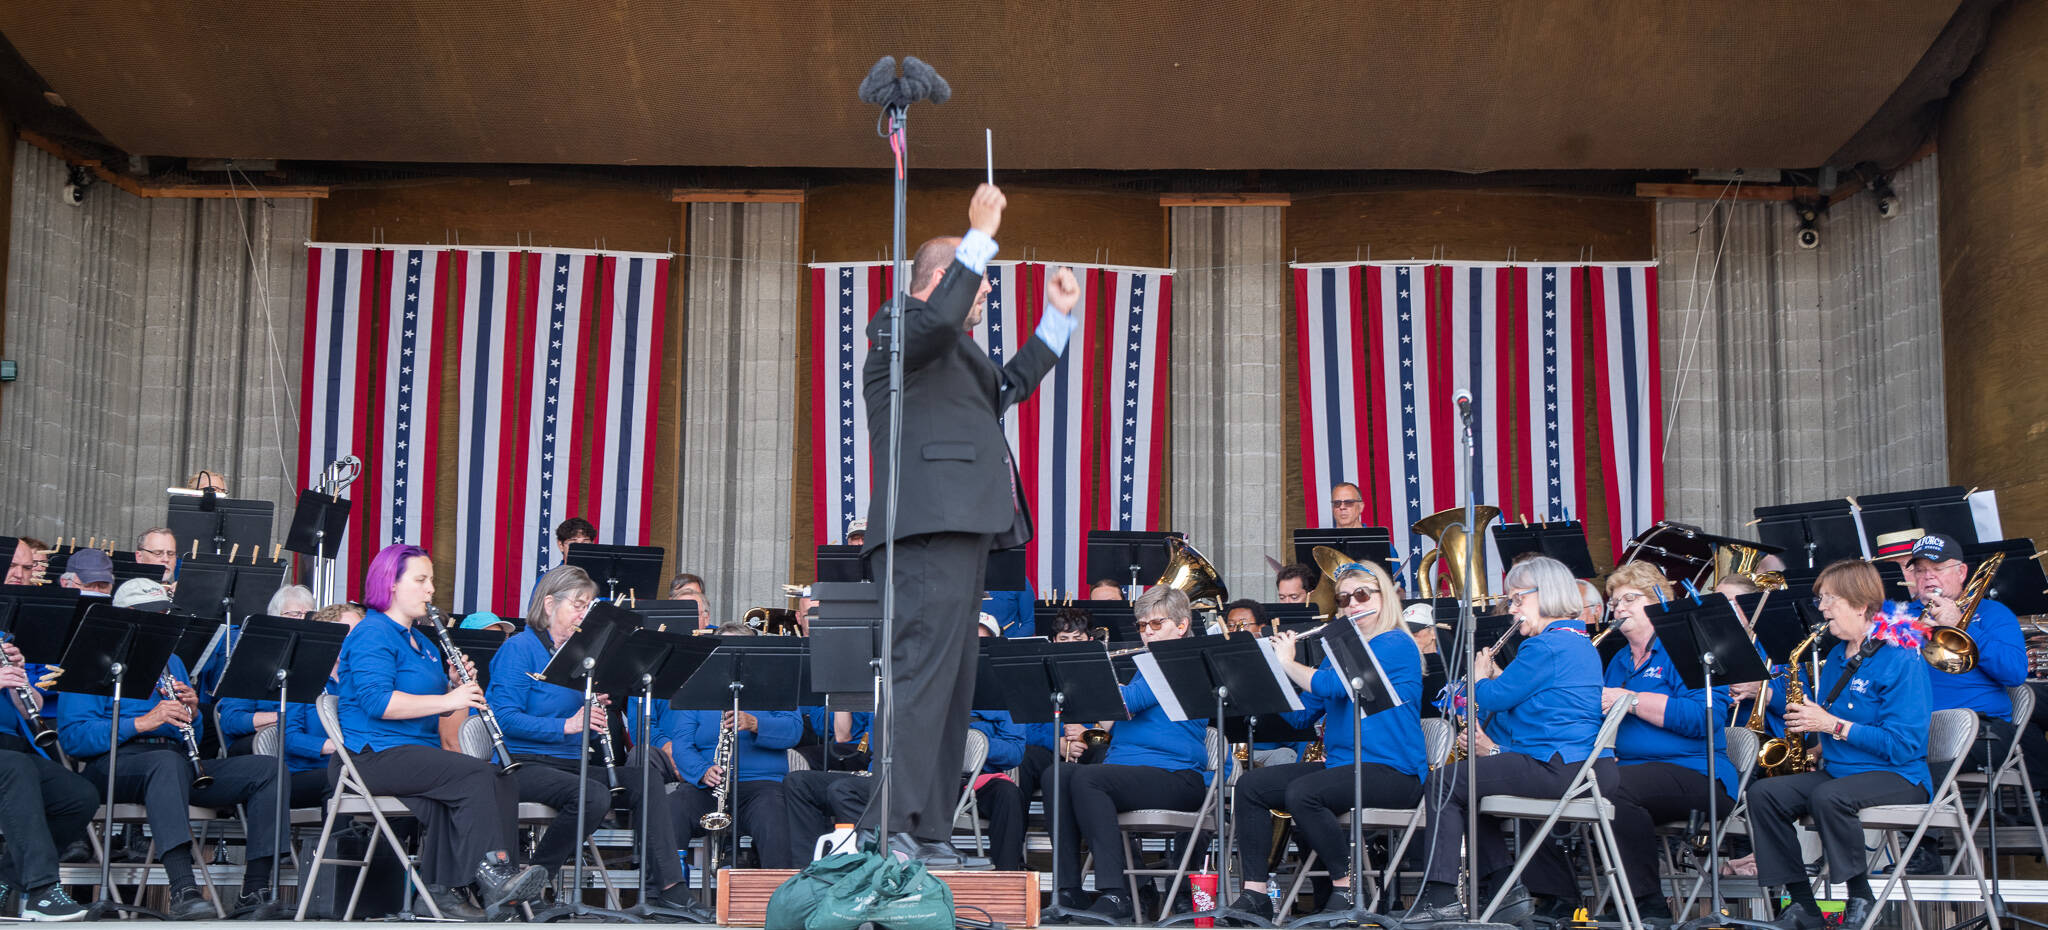 Emily Matthiessen/Olympic Peninsula News Group
Tyler Benedict leads the Sequim City Band at last year’s Independence Day celebration.